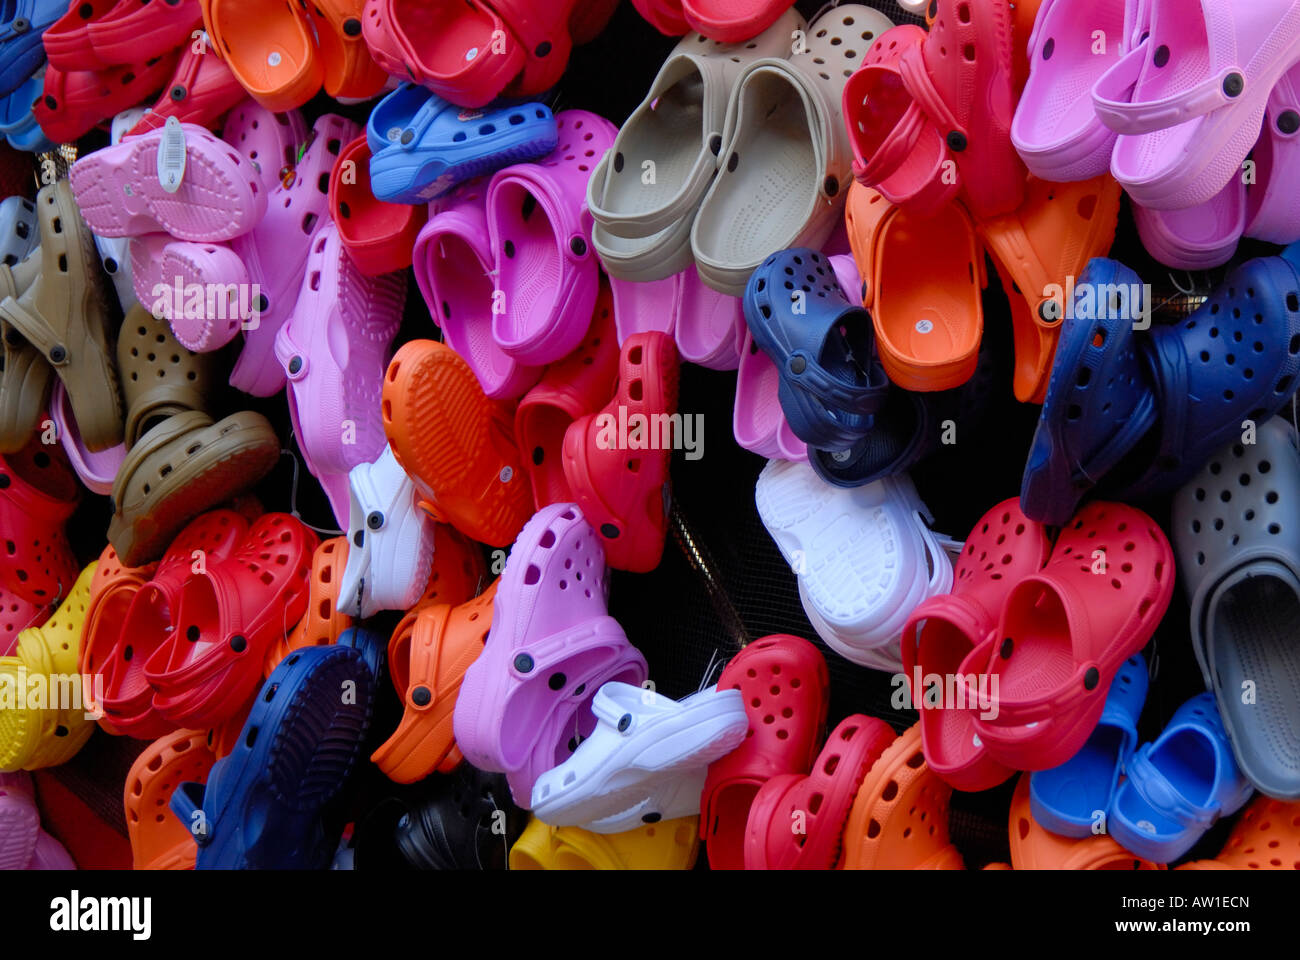 A large number of different colour crocs shoes sandals hanging on a street  vendors stall Lightweight resin material Stock Photo - Alamy